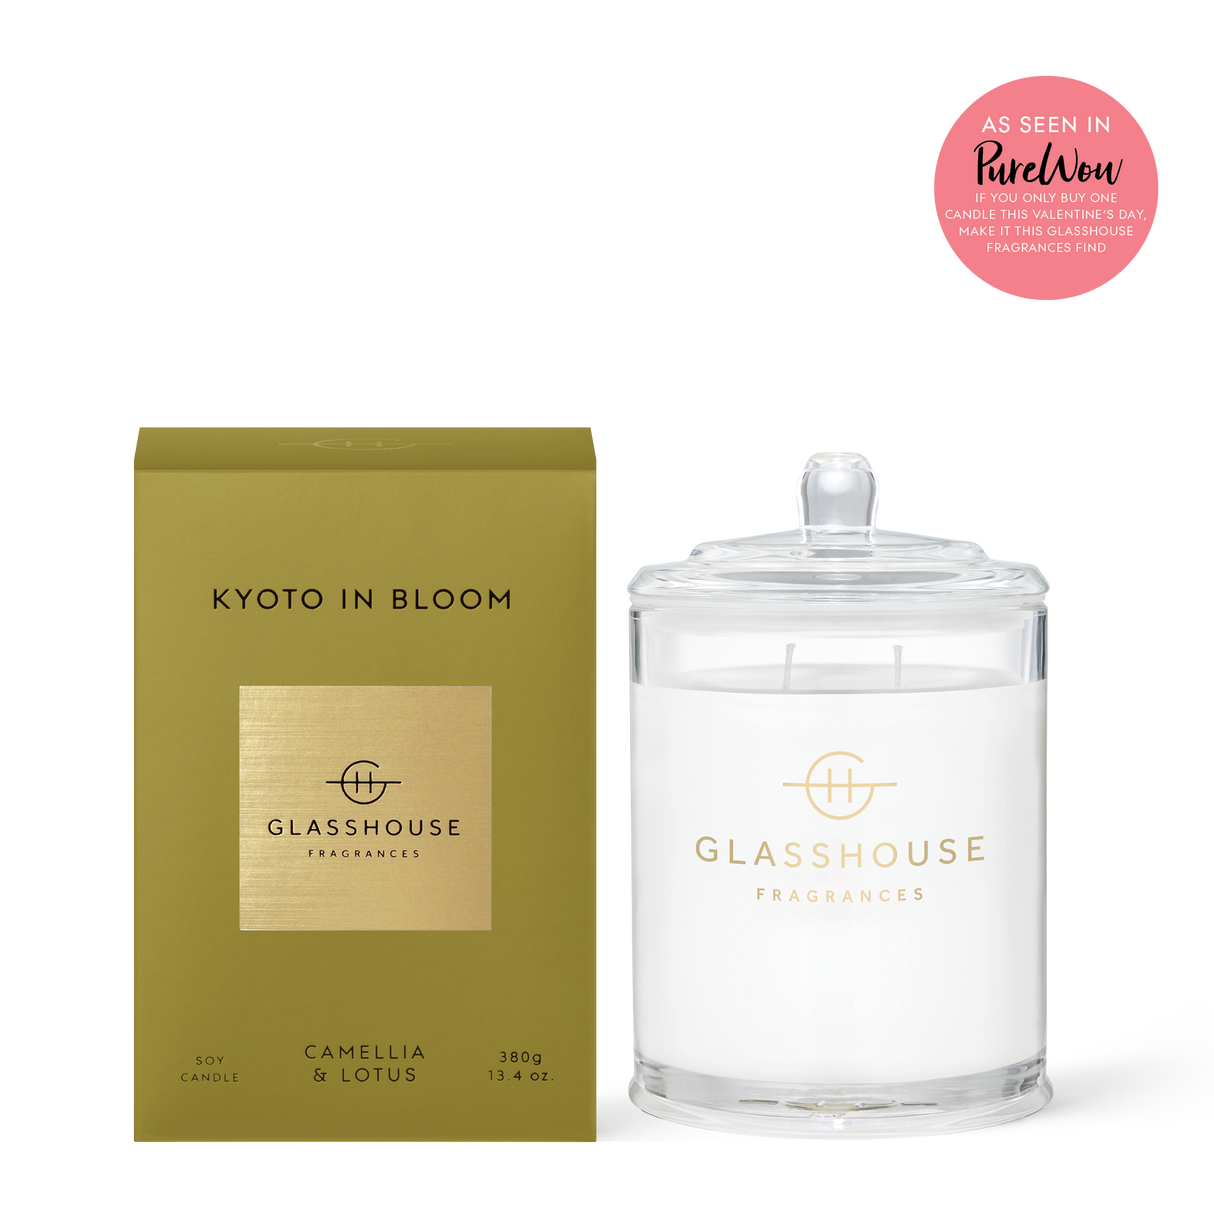 Glasshouse Fragrances - Kyoto in Bloom - 13.4oz Soy Candle